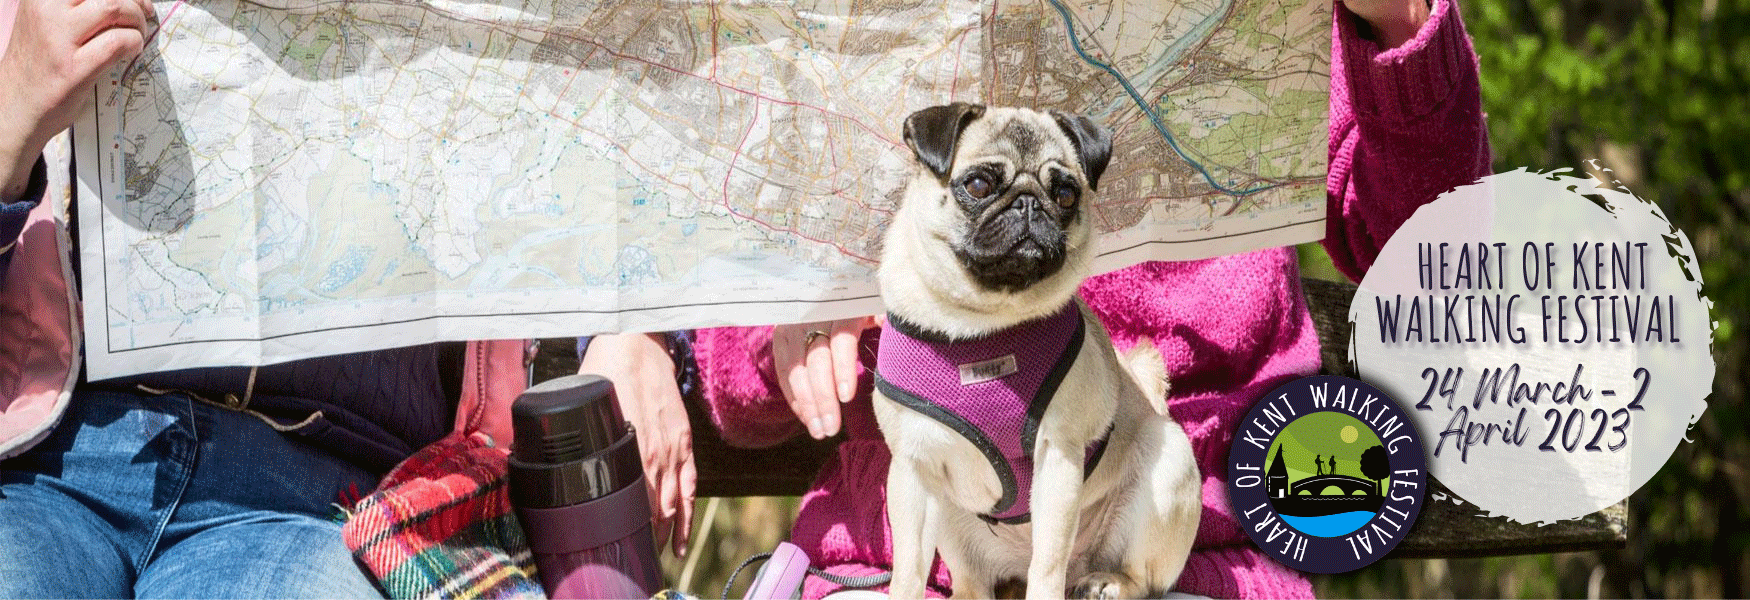 Hucking with Map and Pug
Heart of Kent Walking Festival - 24 March to 2 April 2023